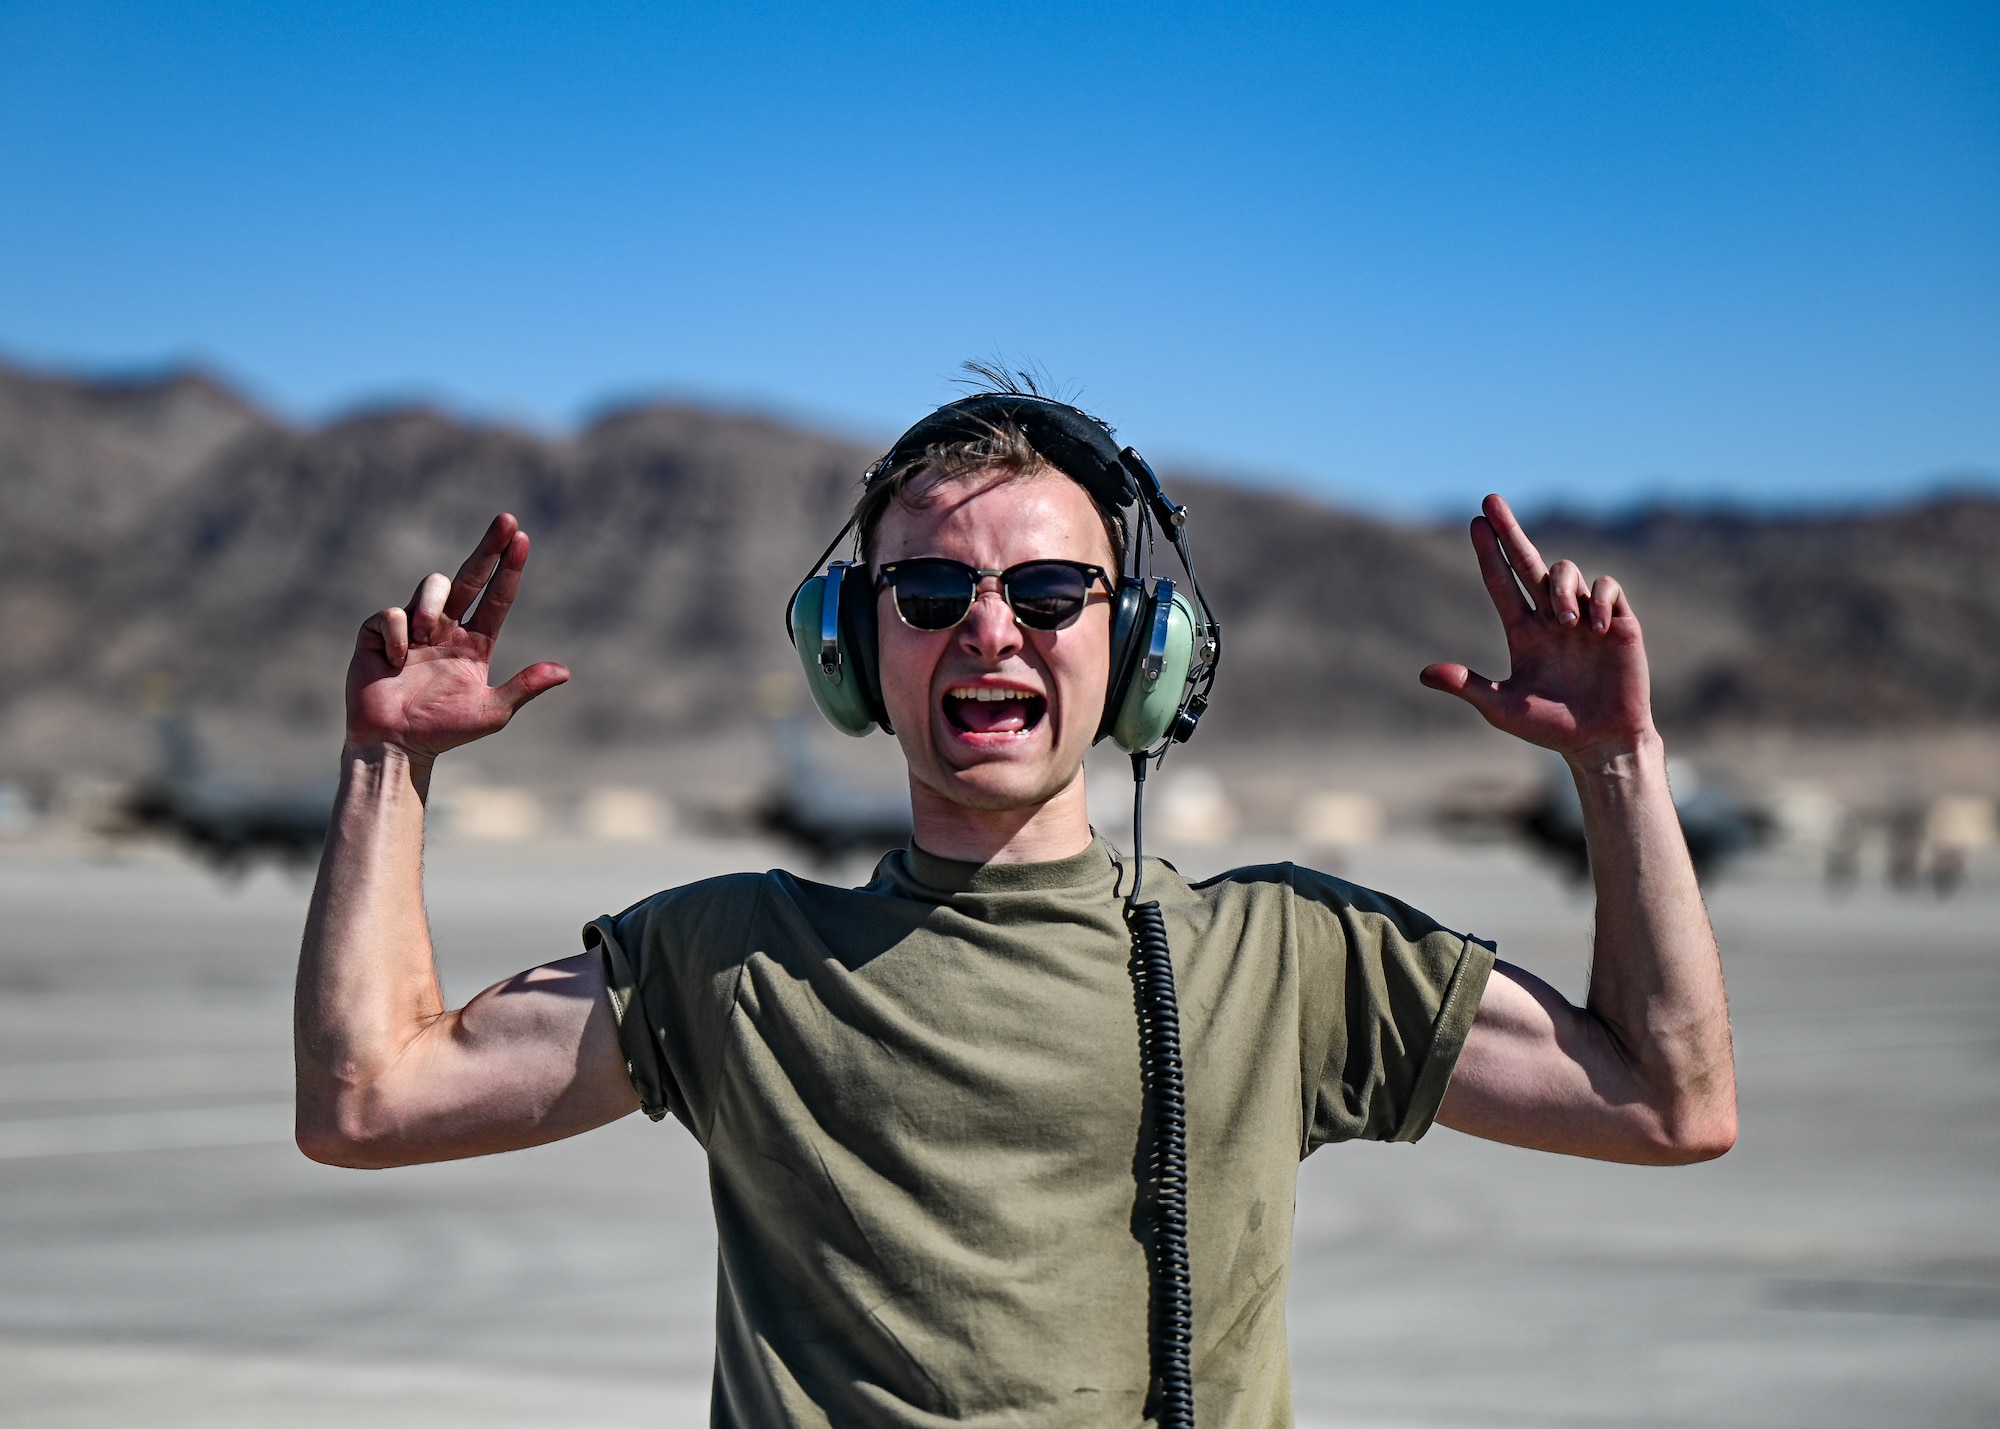 U.S. Air Force Senior Airman Kieran Smith, 55th Fighter Generation Squadron crew chief, expresses his excitement during the first day of exercise Red Flag-Nellis 23-2 at Nellis Air Force Base, Nevada, March 13, 2023. The 20th Maintenance Group is a vital component to the Wild Weasel mission and the Airmen involved in Red Flag 23-2 are critical to delivering combat airpower. (U.S. Air Force photo by Staff Sgt. Madeline Herzog)